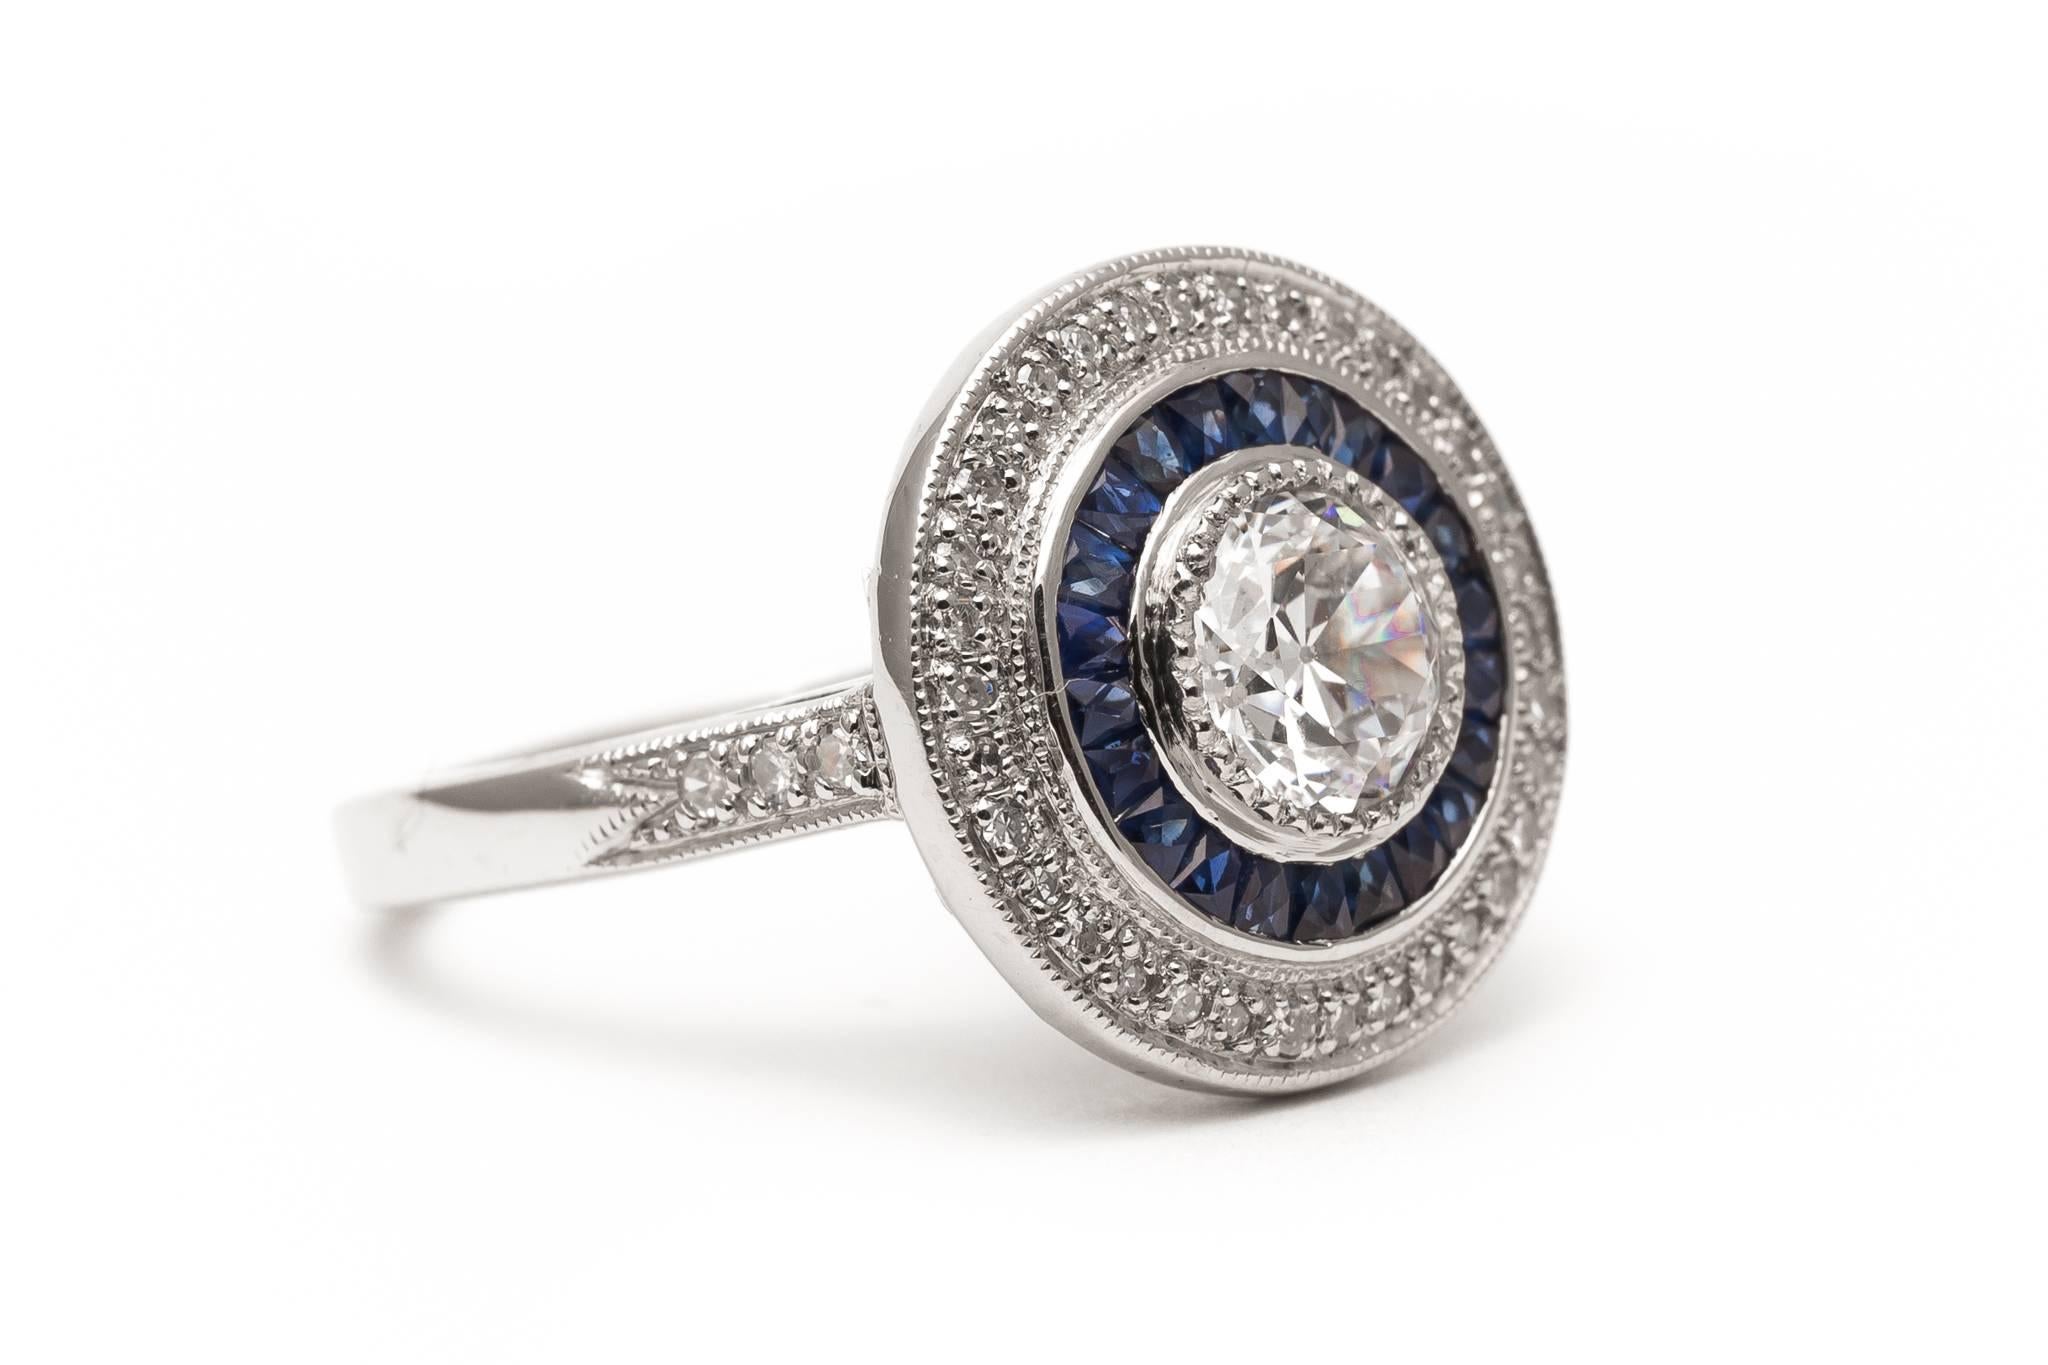 A ring with a unique twist on the traditional diamond target style engagement ring.  Featuring a center antique European cut diamond framed by rich blue French cut sapphires, this ring also features a unique outer row of pave set Swiss cut